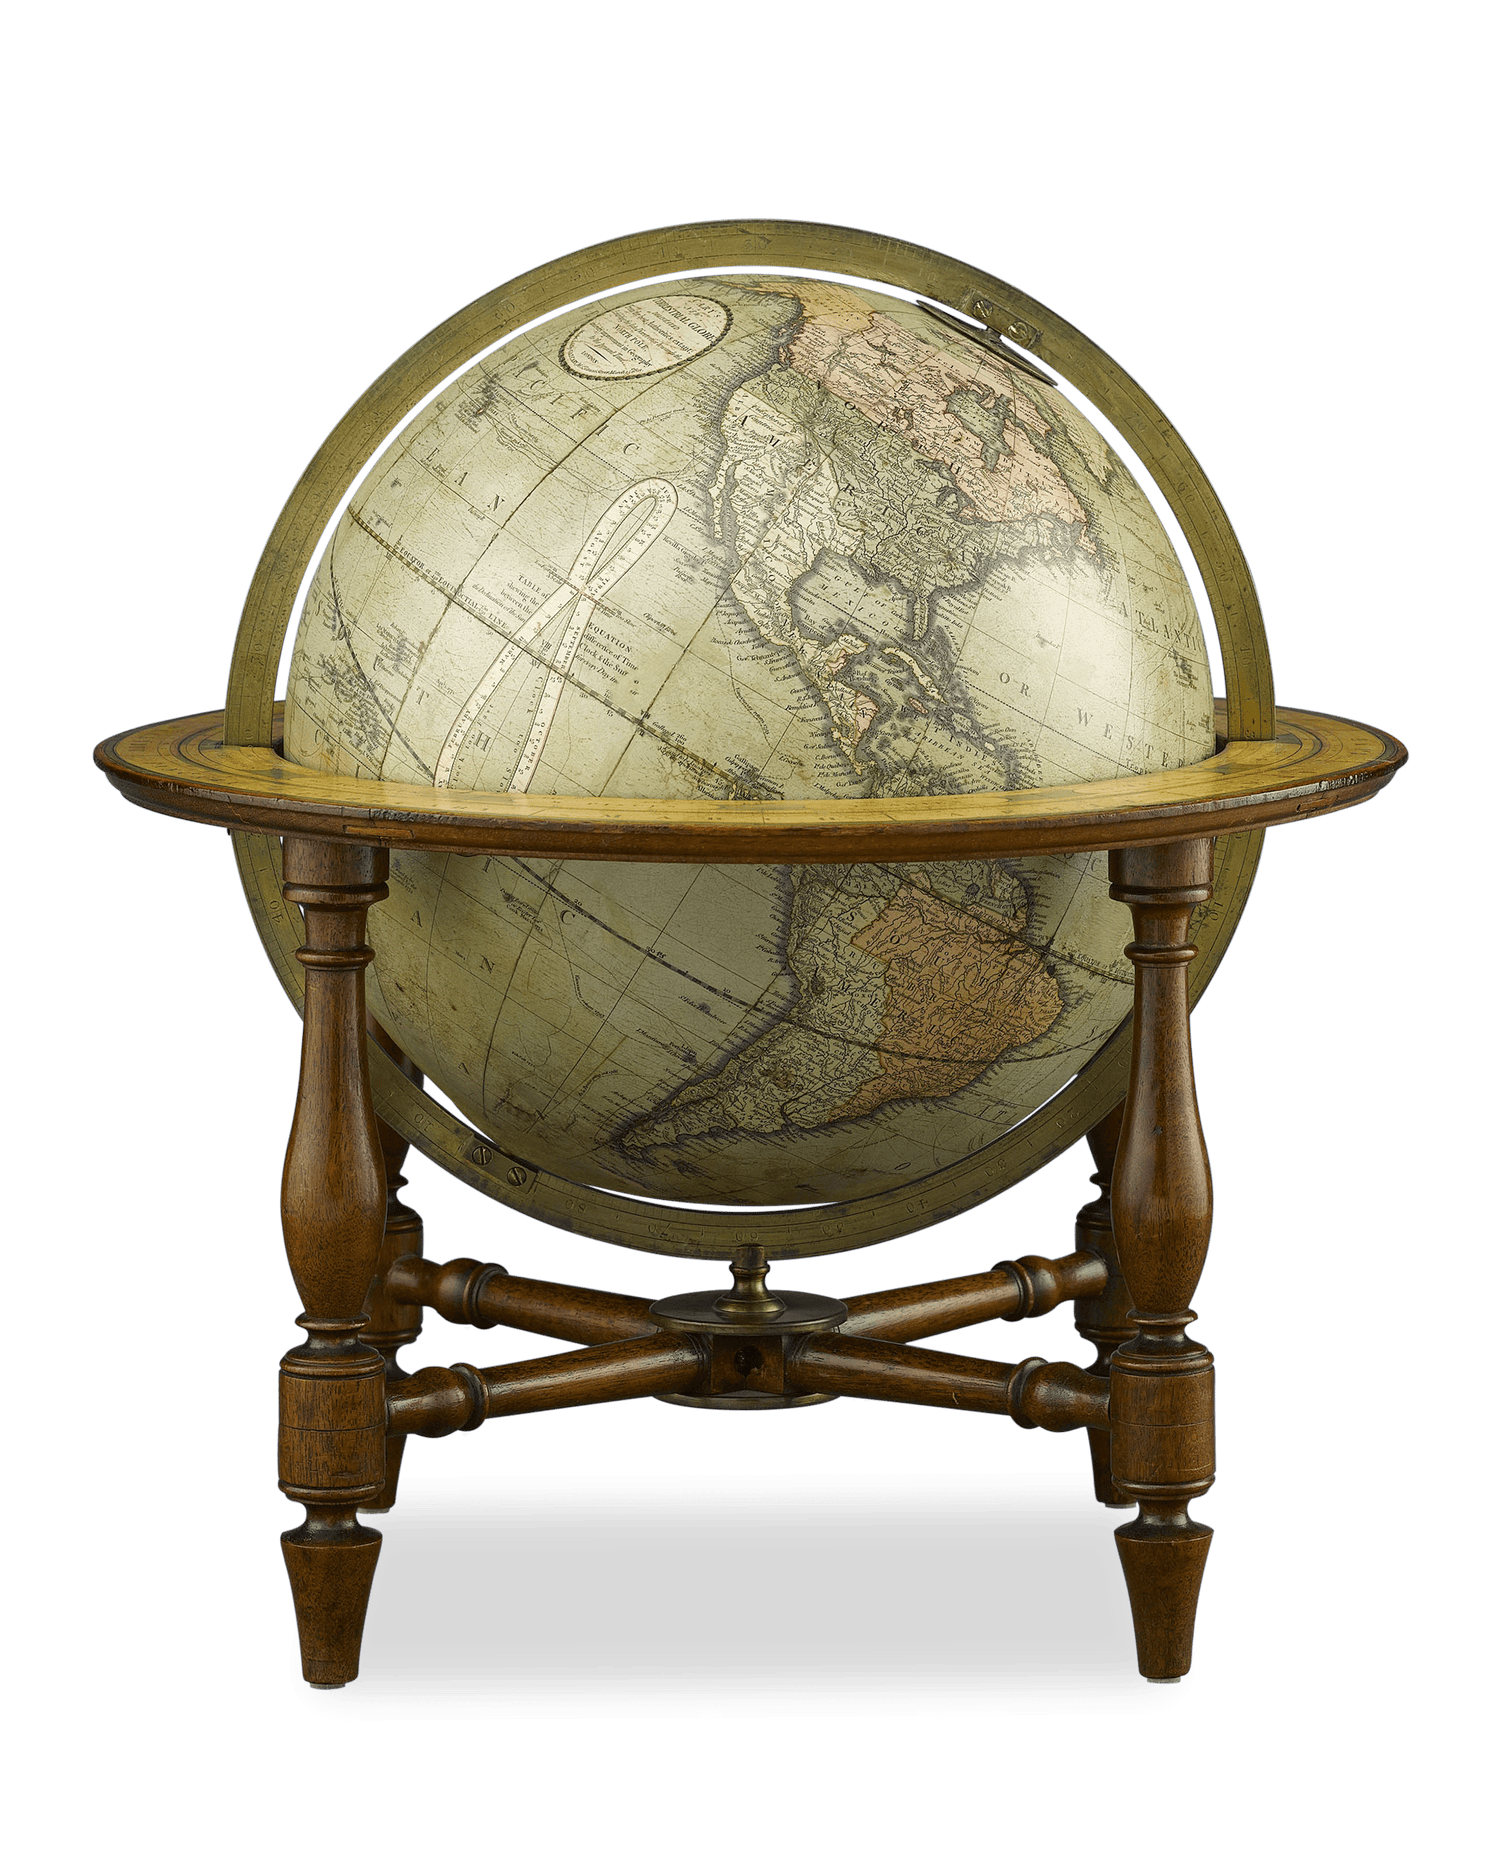 The most current information about the earth's landscape is at hand on the terrestrial globe